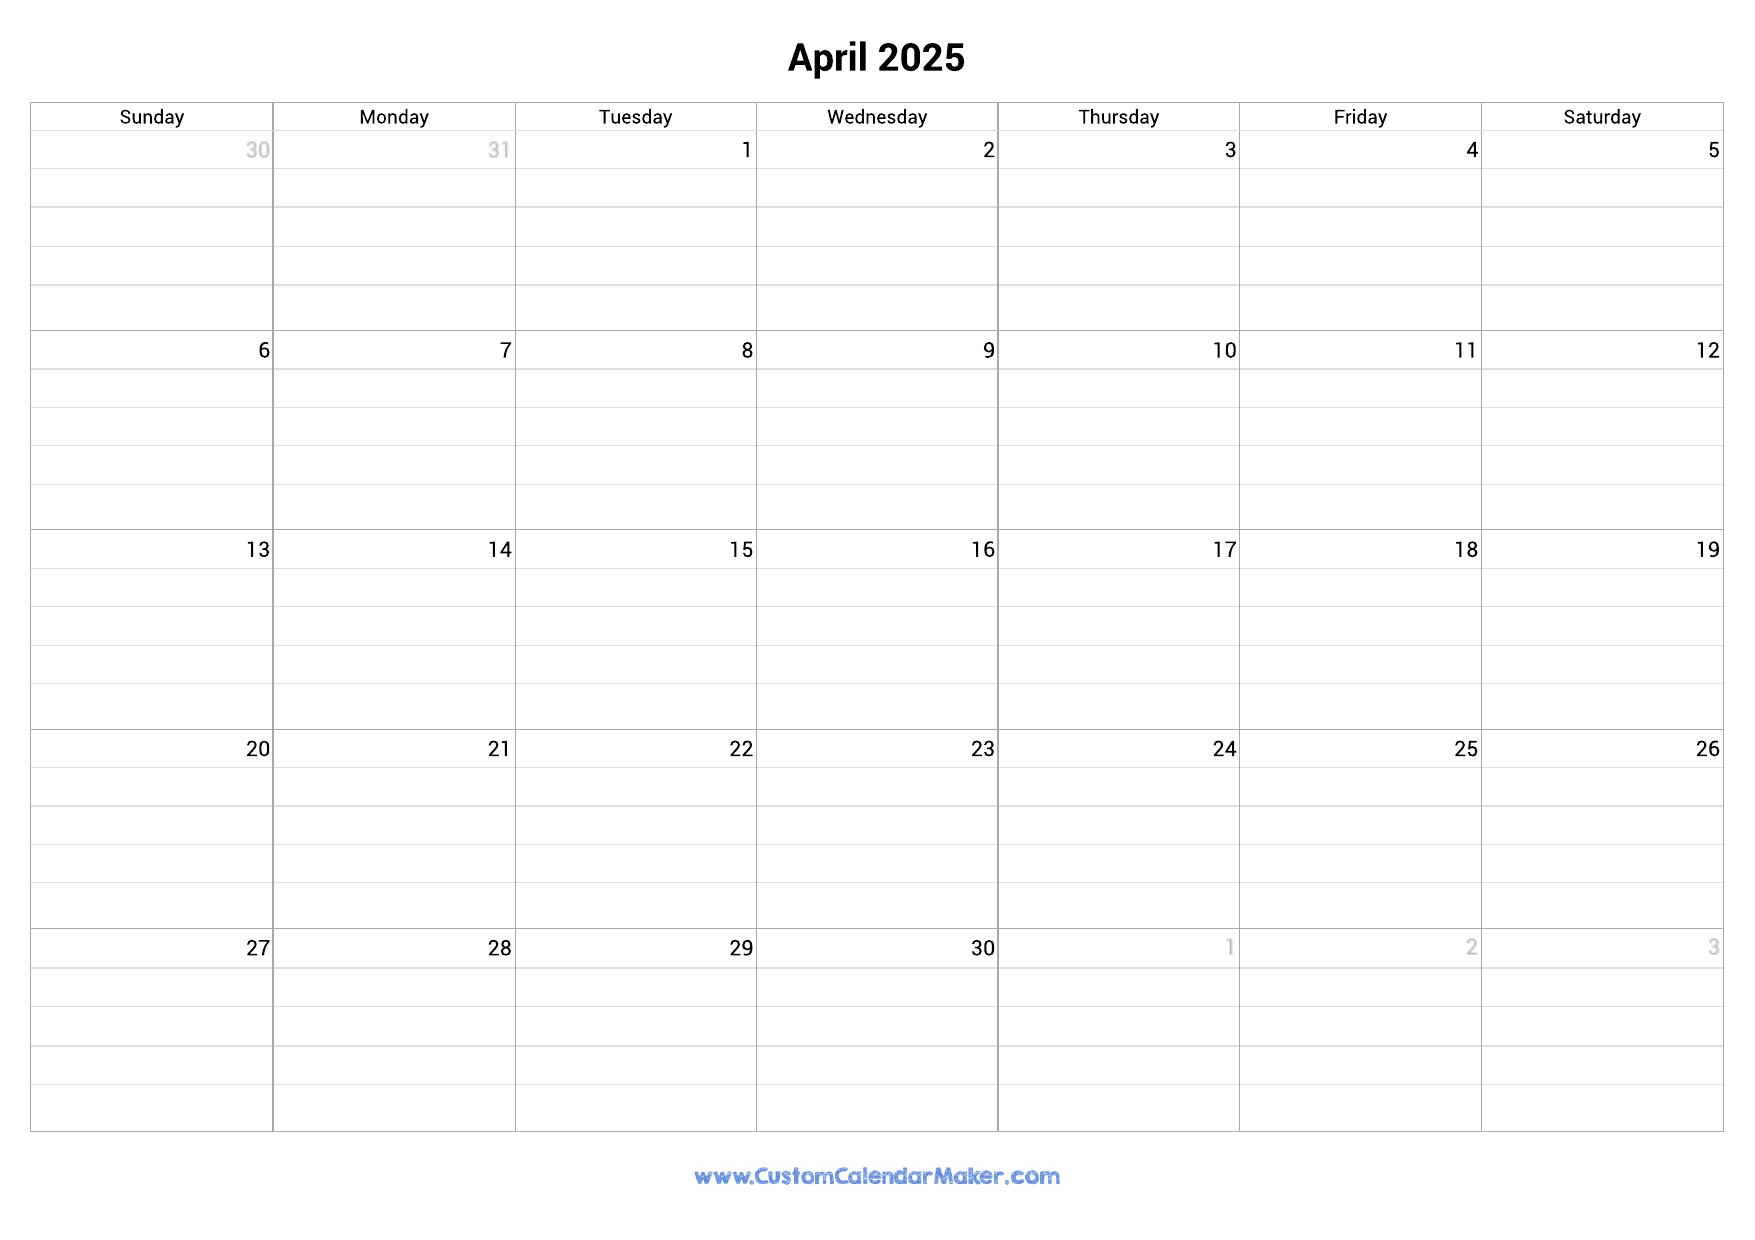 april-2025-fillable-calendar-grid-with-lines